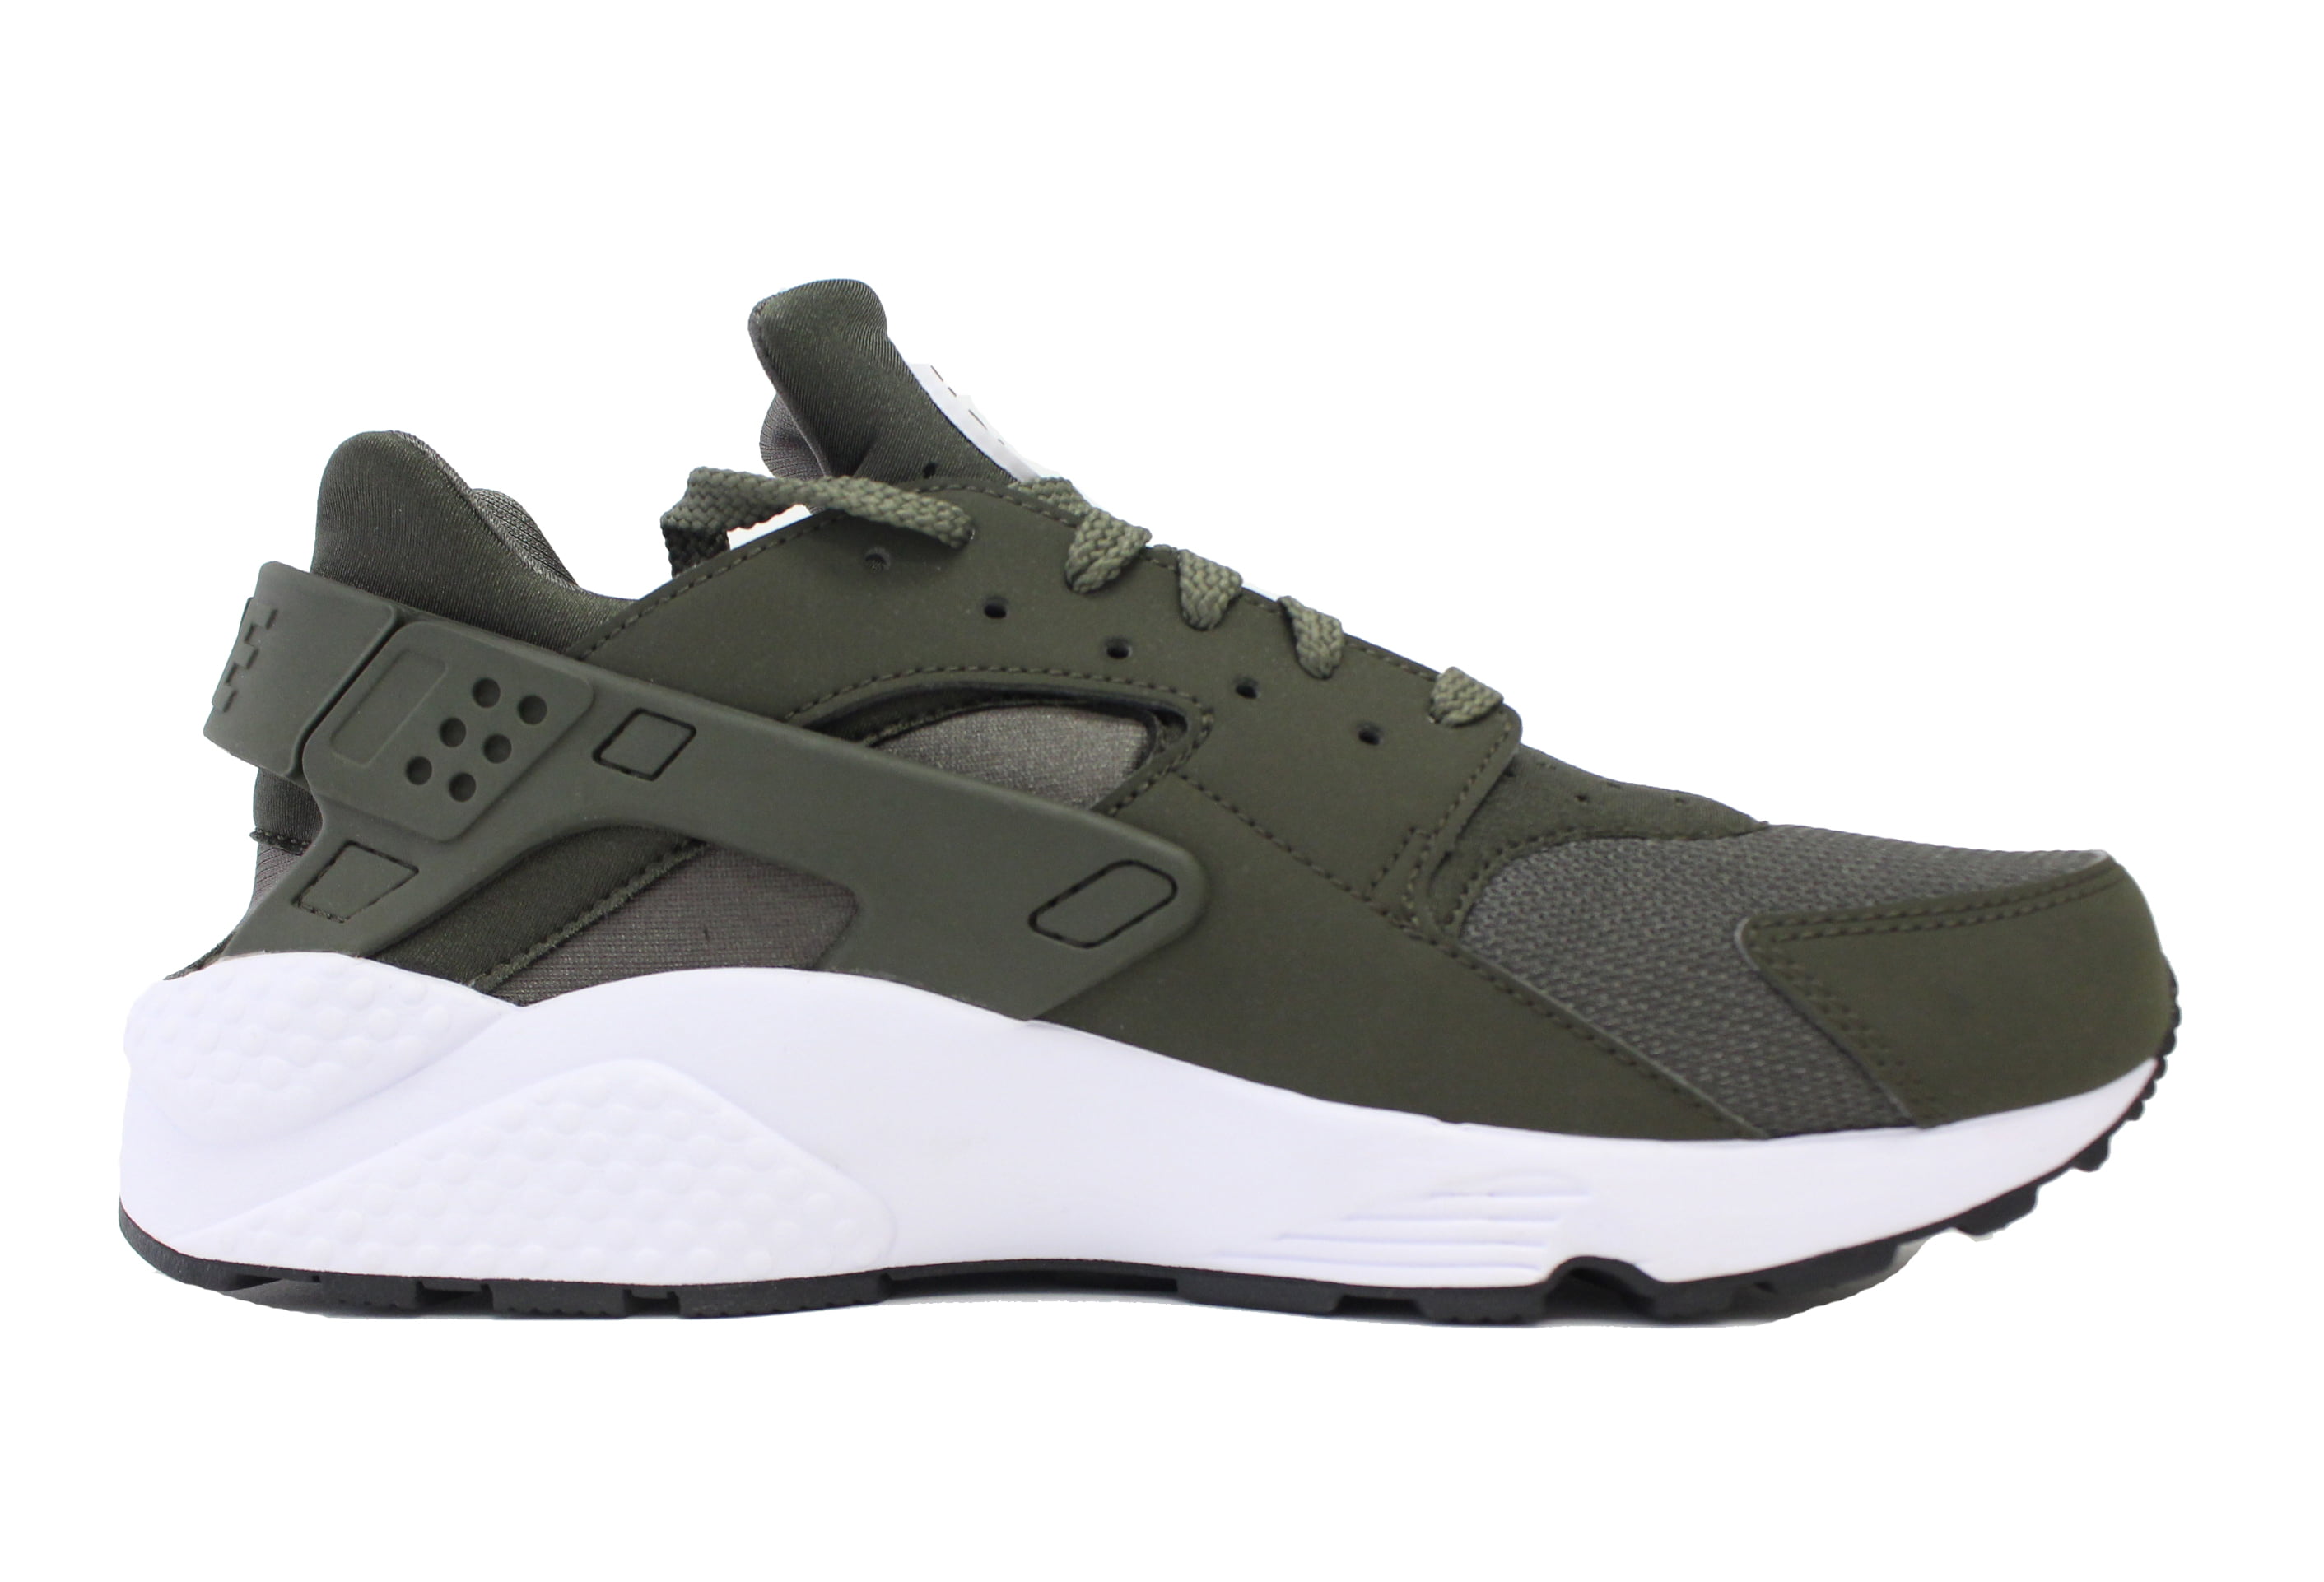 Air Huarache rubber-trimmed leather, mesh and neoprene sneakers